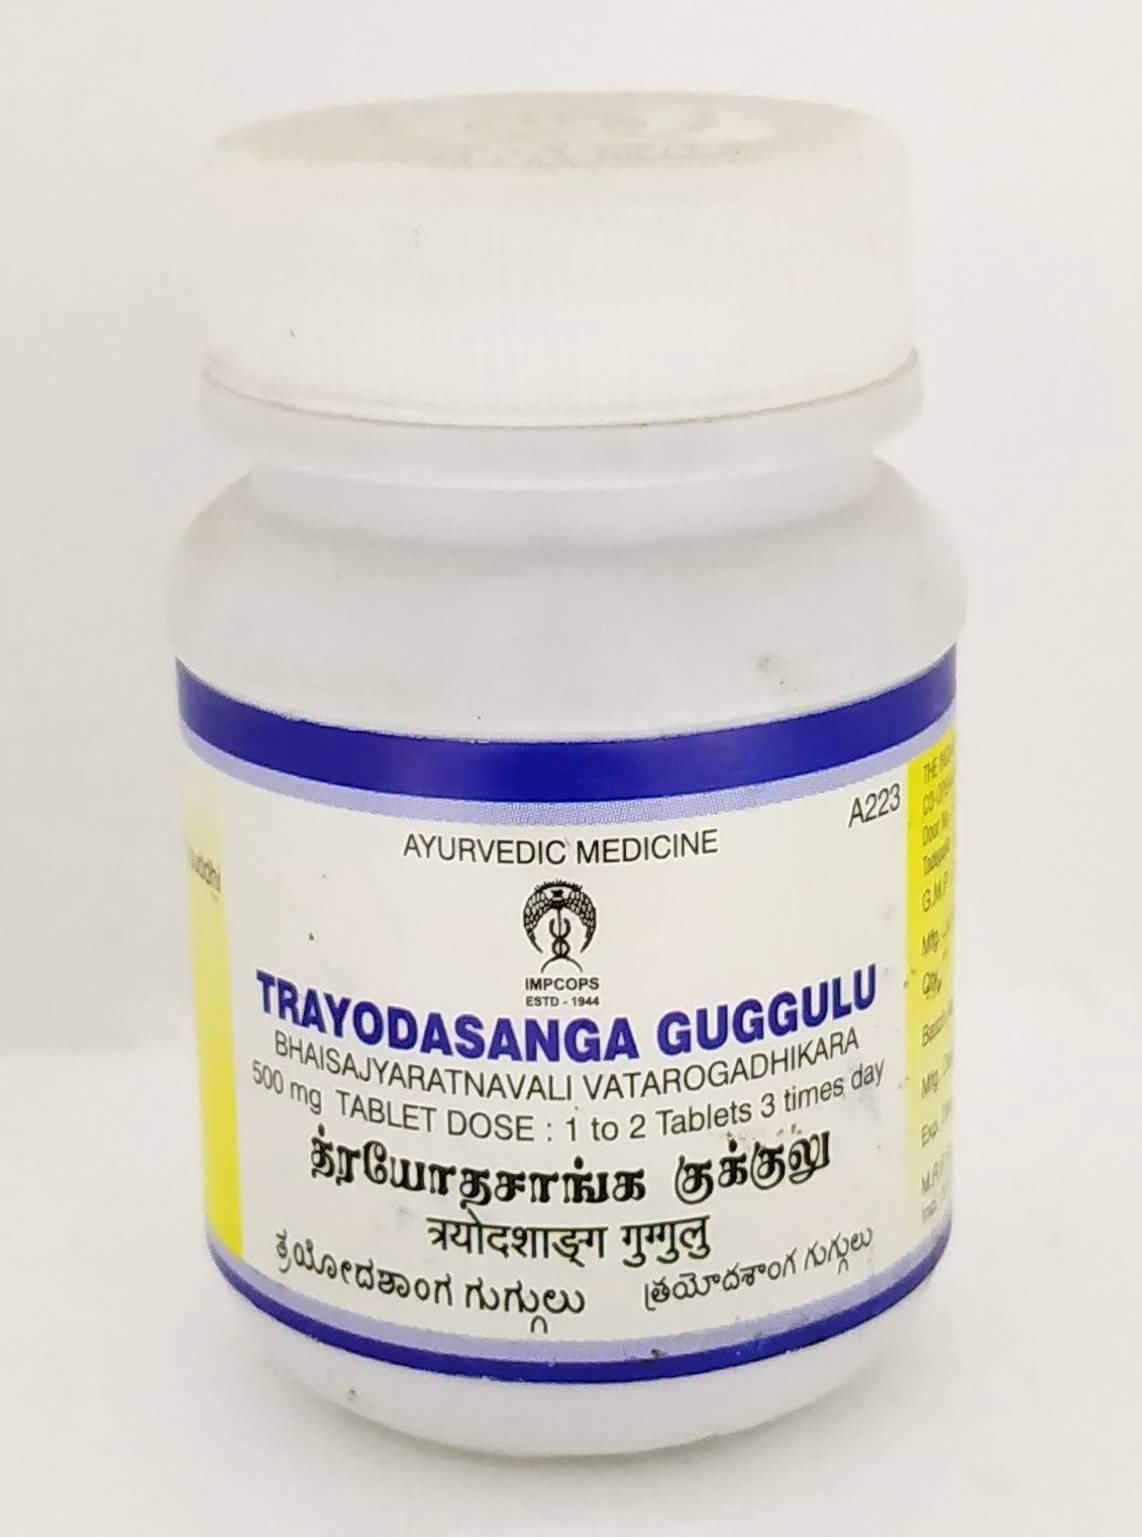 Shop Trayodasang Guggulu - 50Tablets at price 84.00 from Impcops Online - Ayush Care